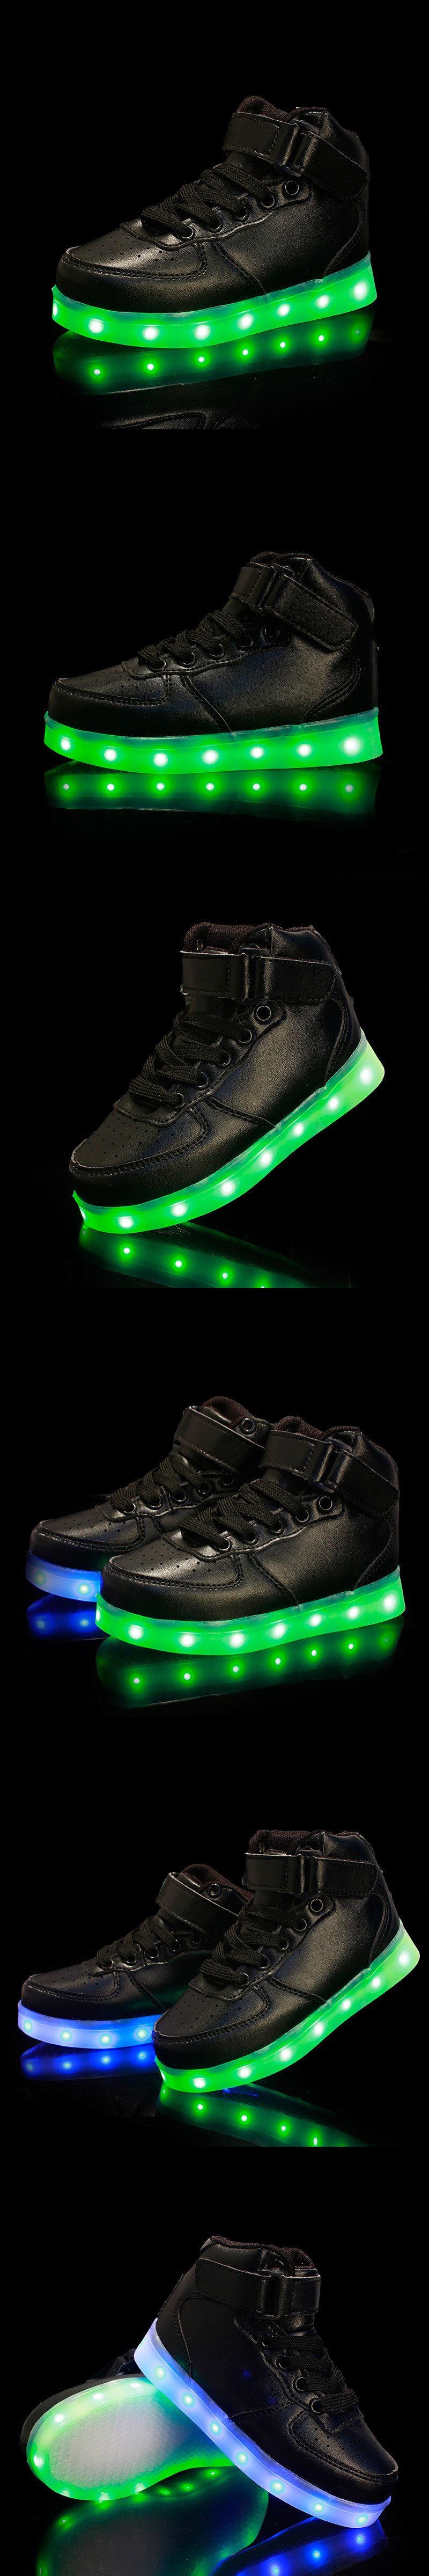 Autumn-Winter-New-Fashion-Boys-Girls-LED-Light-Shoes-Kids-USB-Charge-Colorful-Casual-Sneakers-1074110